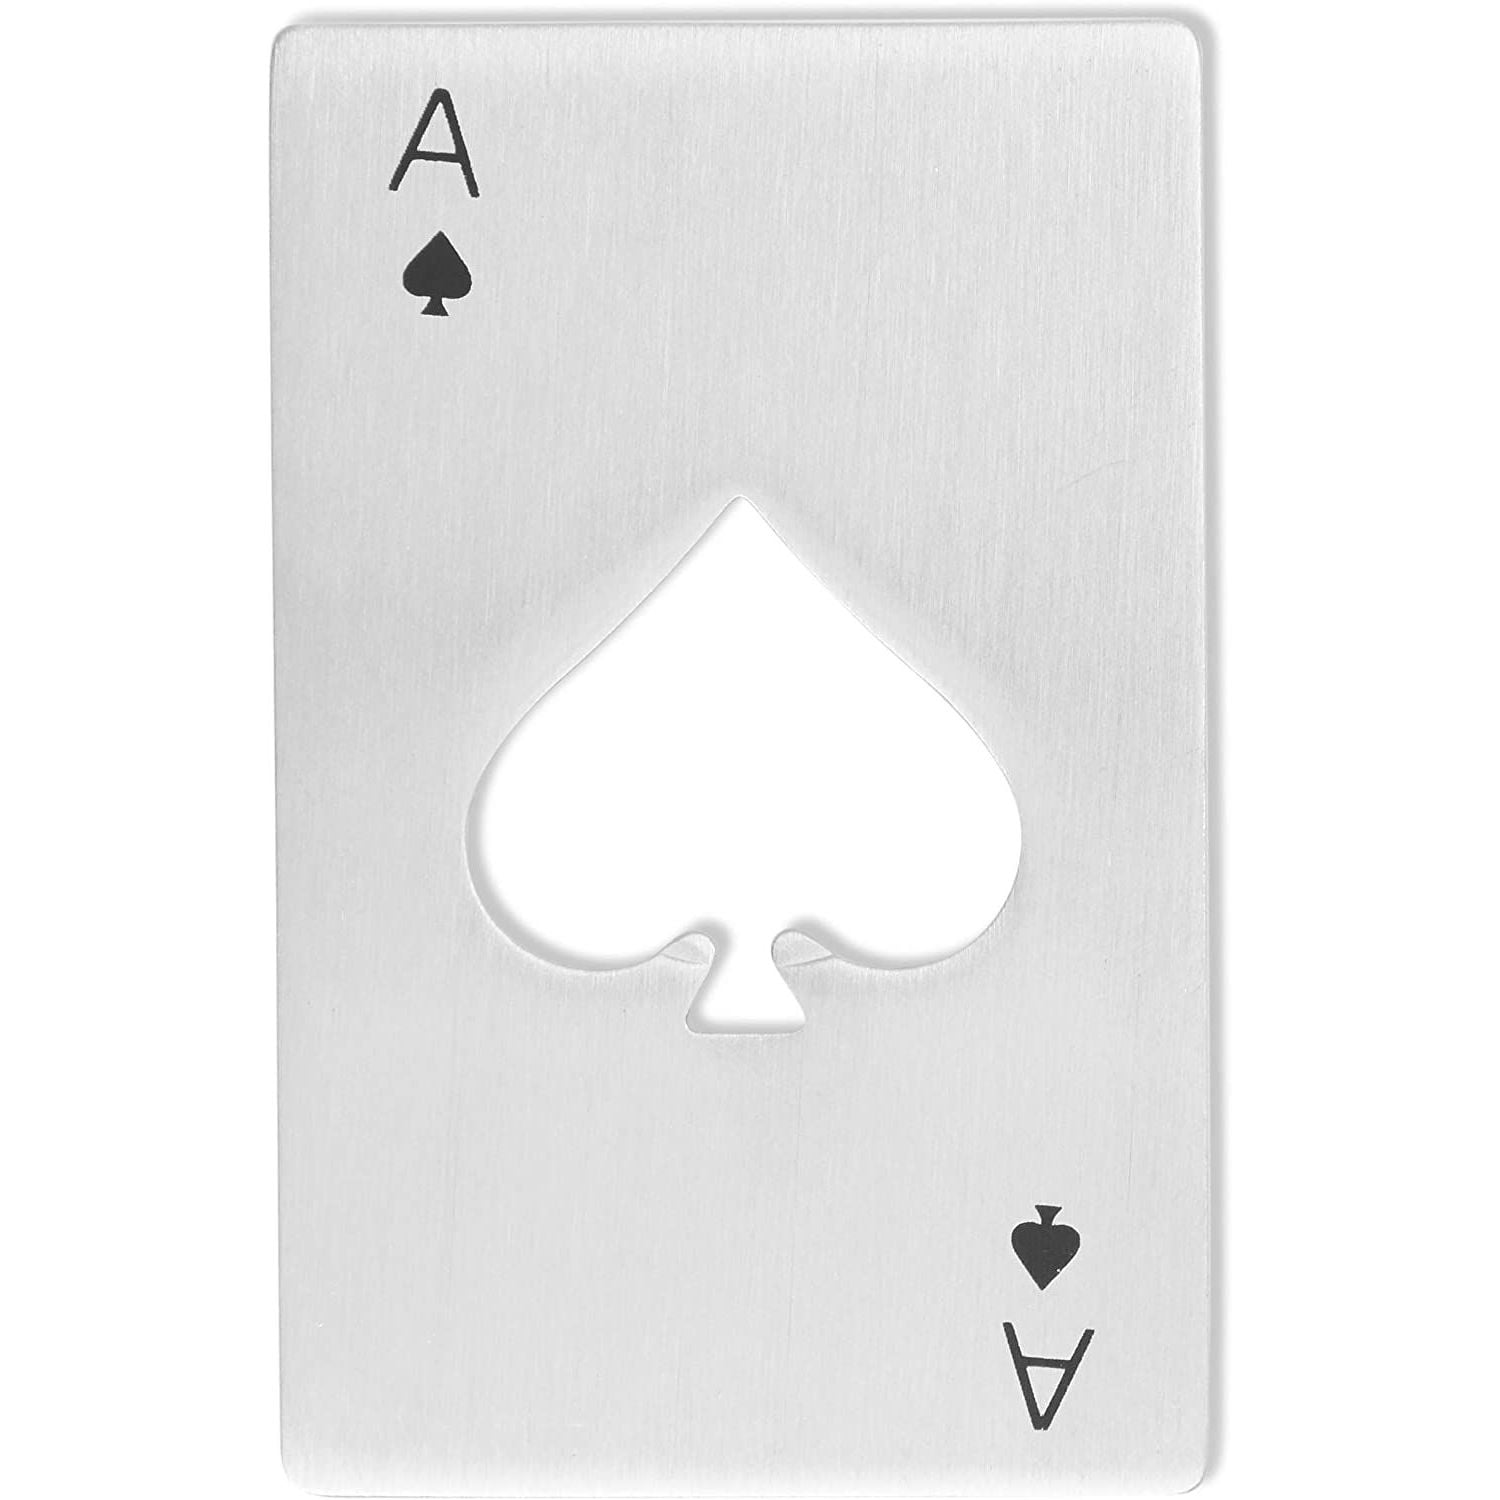 NIP Ace of Spades Playing Card Stainless Steel Bottle Opener Black or Silver 